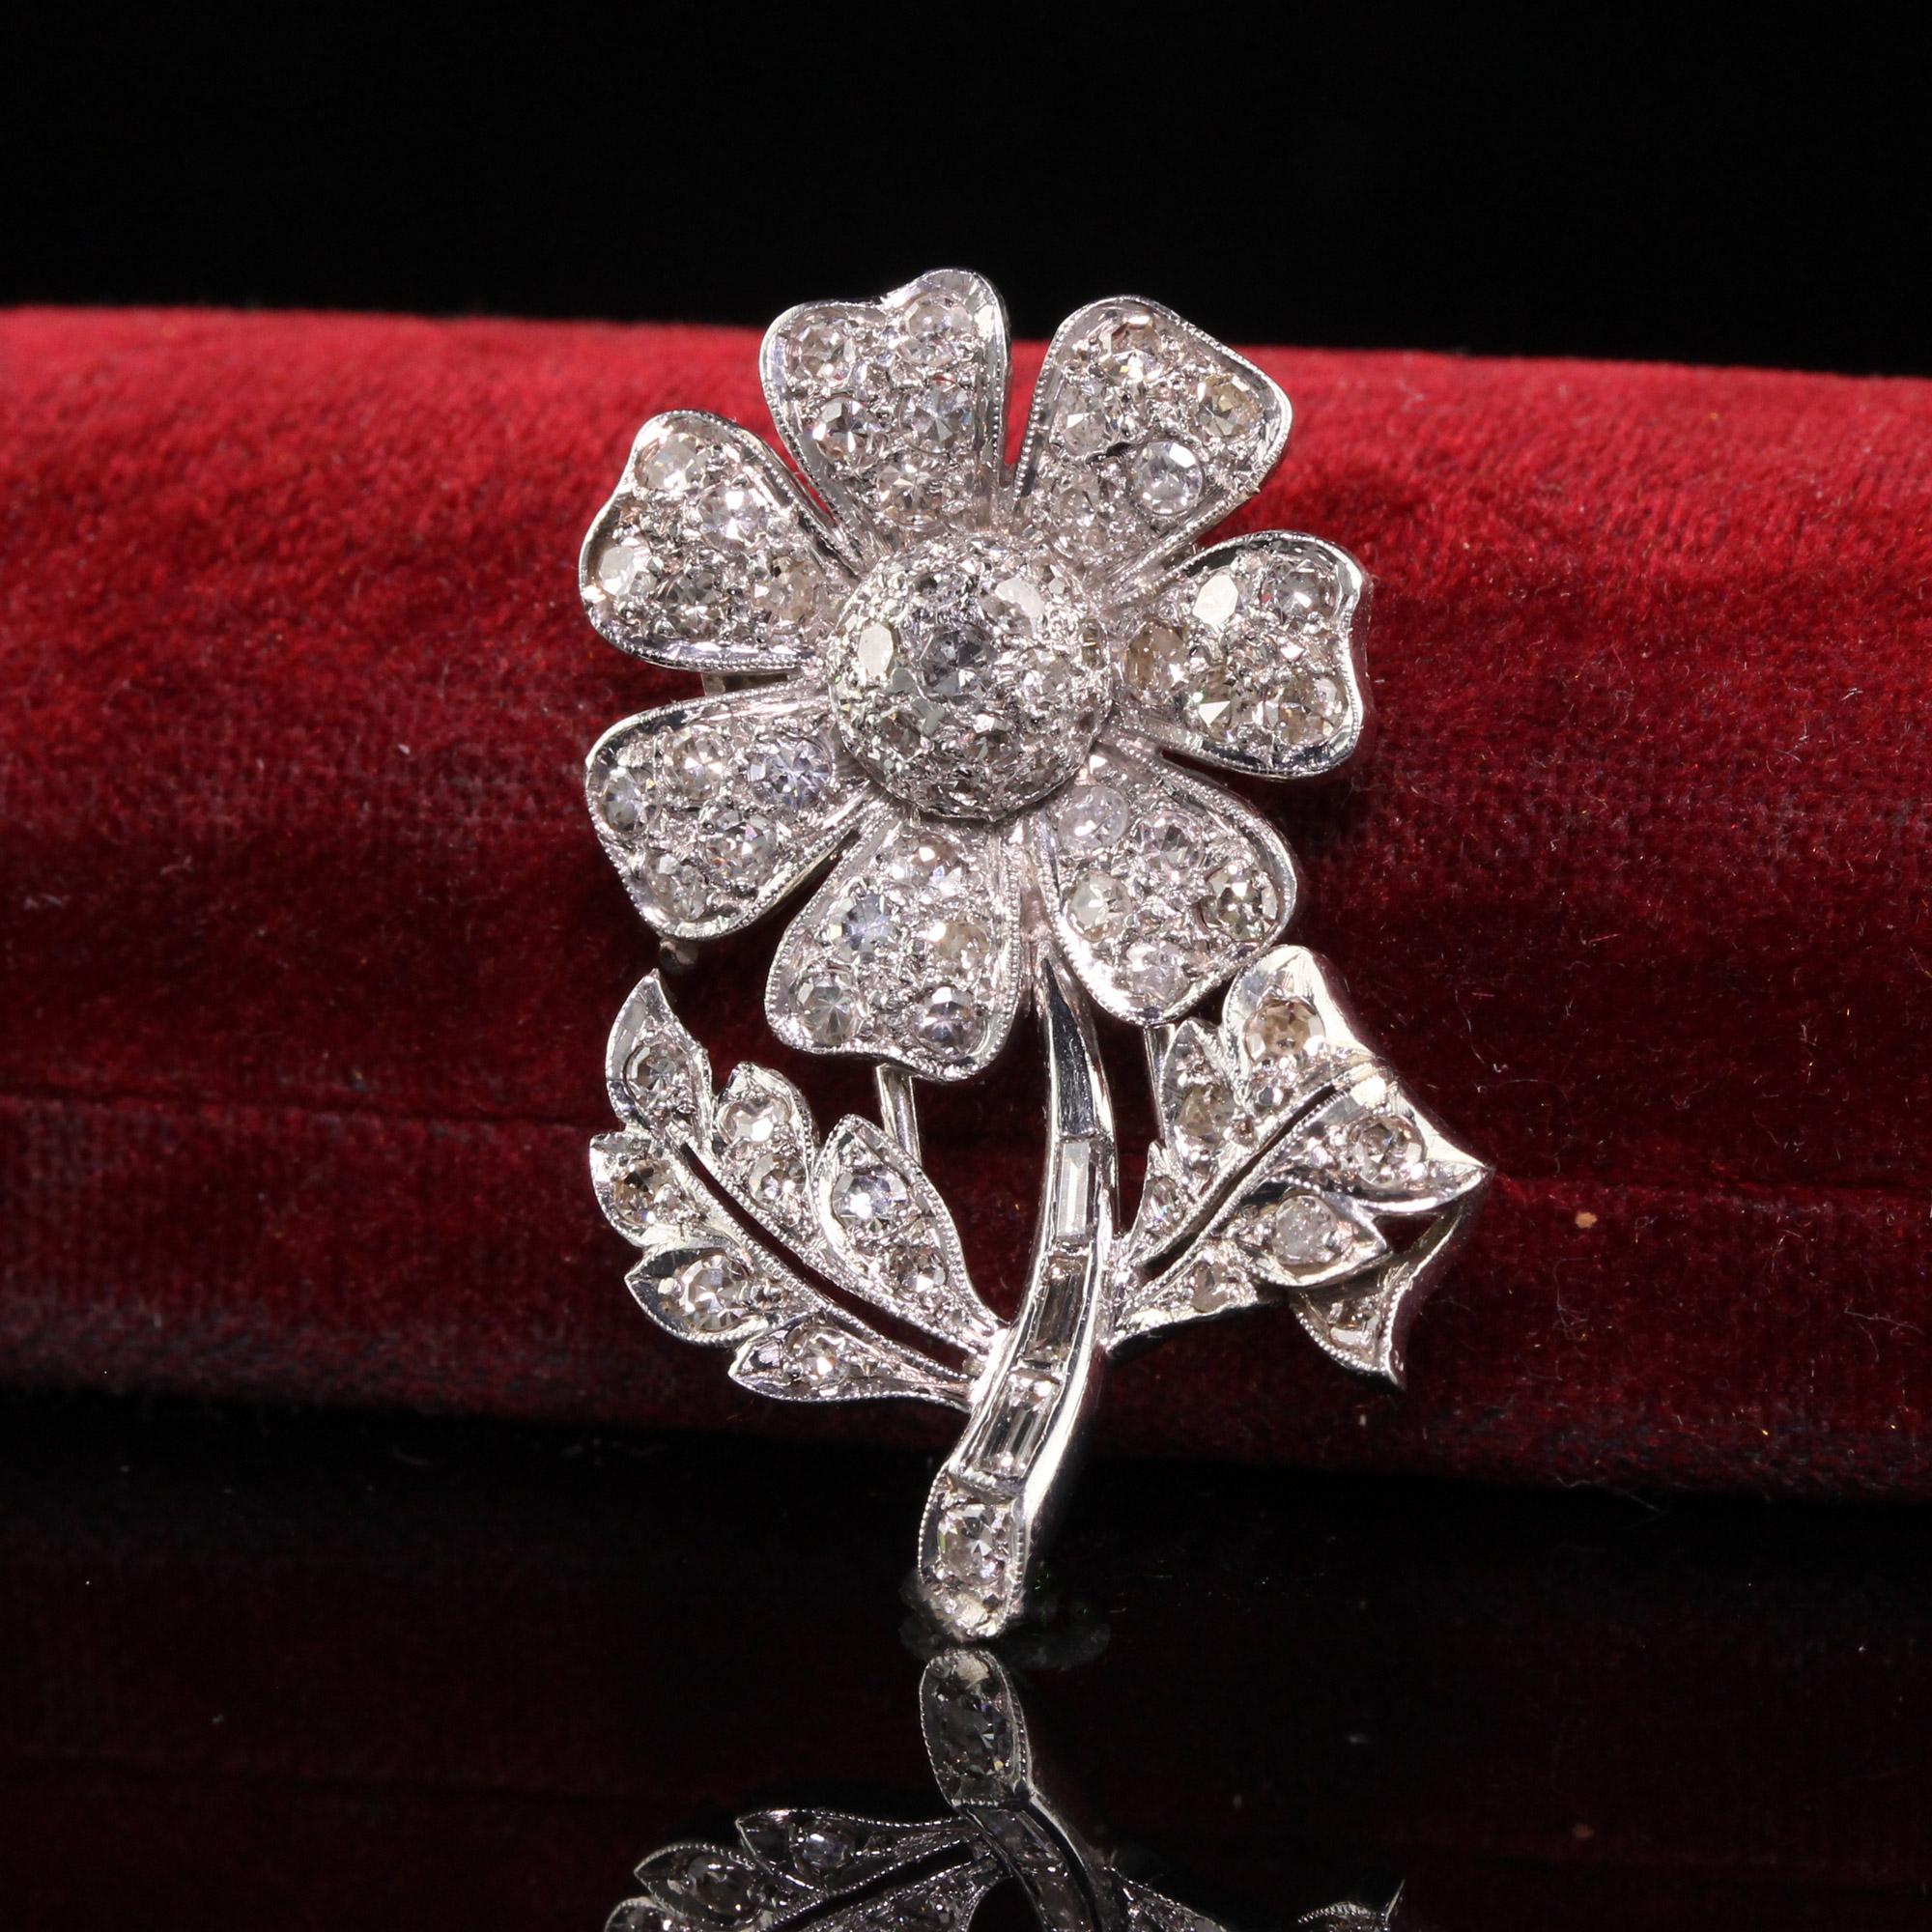 Beautiful Antique Art Deco Platinum Walser Wald Single Cut Diamond Flower Pin. This incredible pin is crafted in platinum. The pin has single cut diamonds all over the flower and petals and has baguette diamonds as the stalk. The pin is crafted